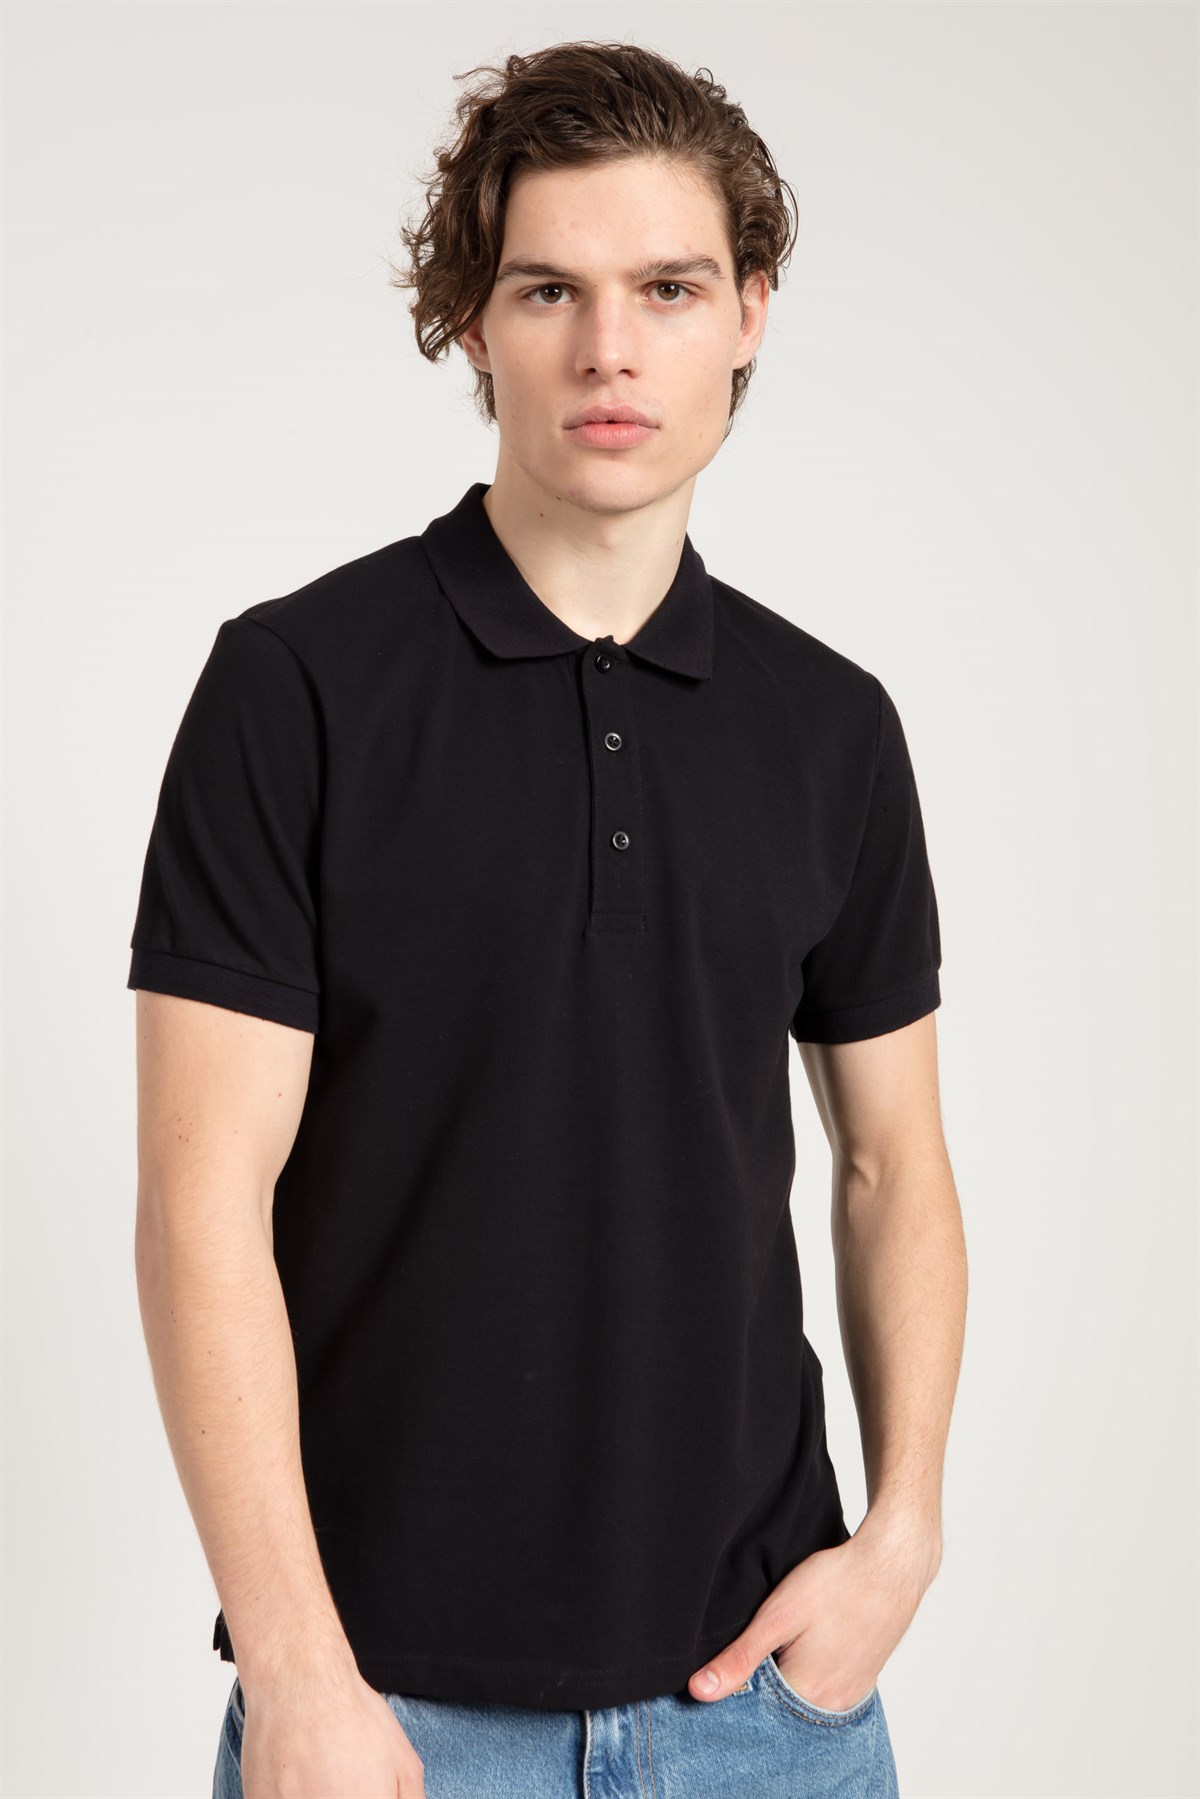 Polo Collared T-shirt in Black